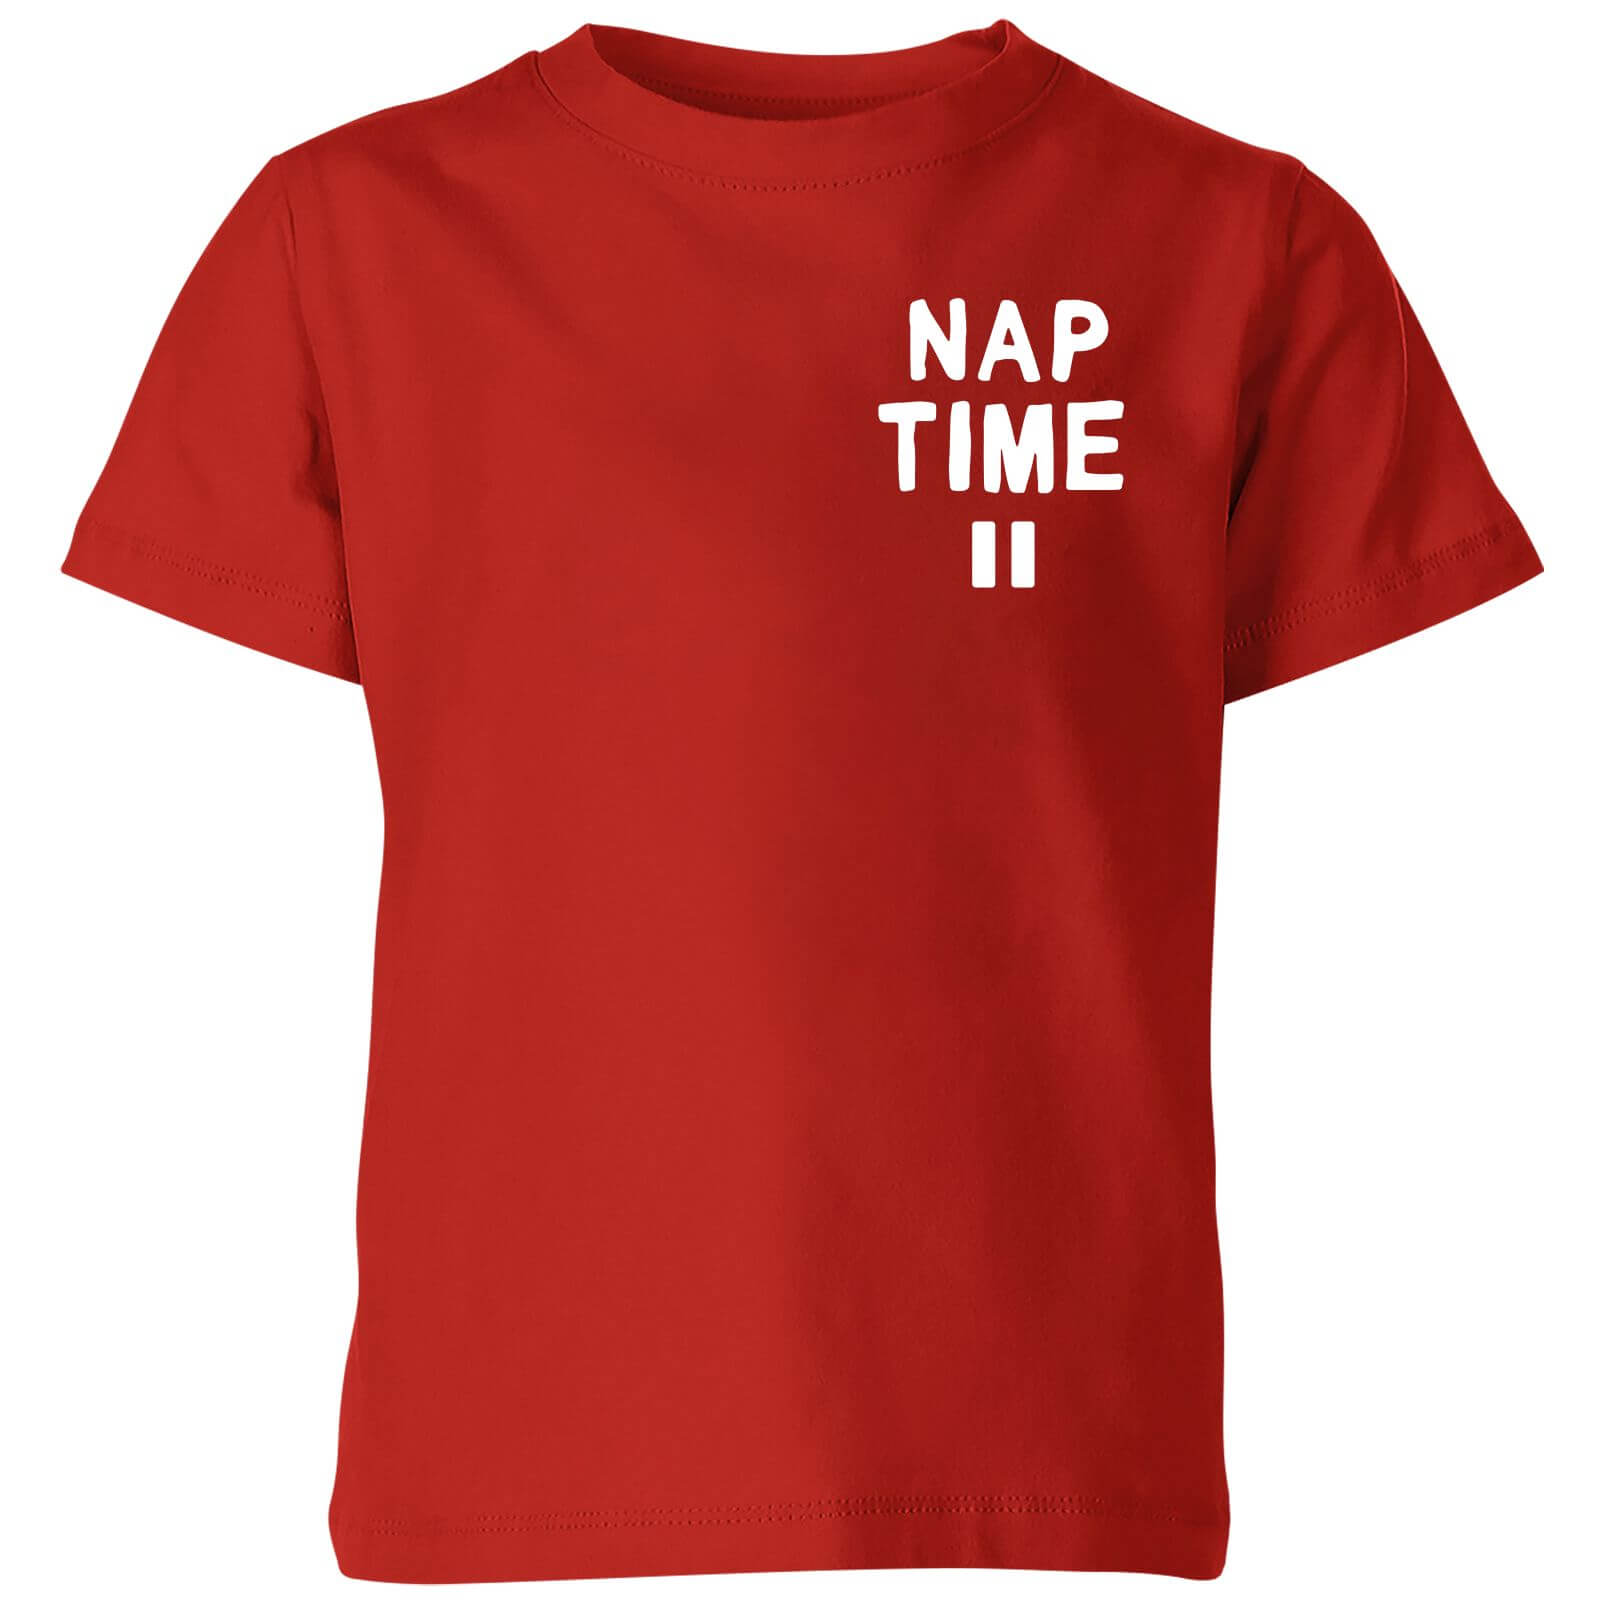 My Little Rascal Nap Time Kids' T-Shirt - Red - 3-4 Years - Red